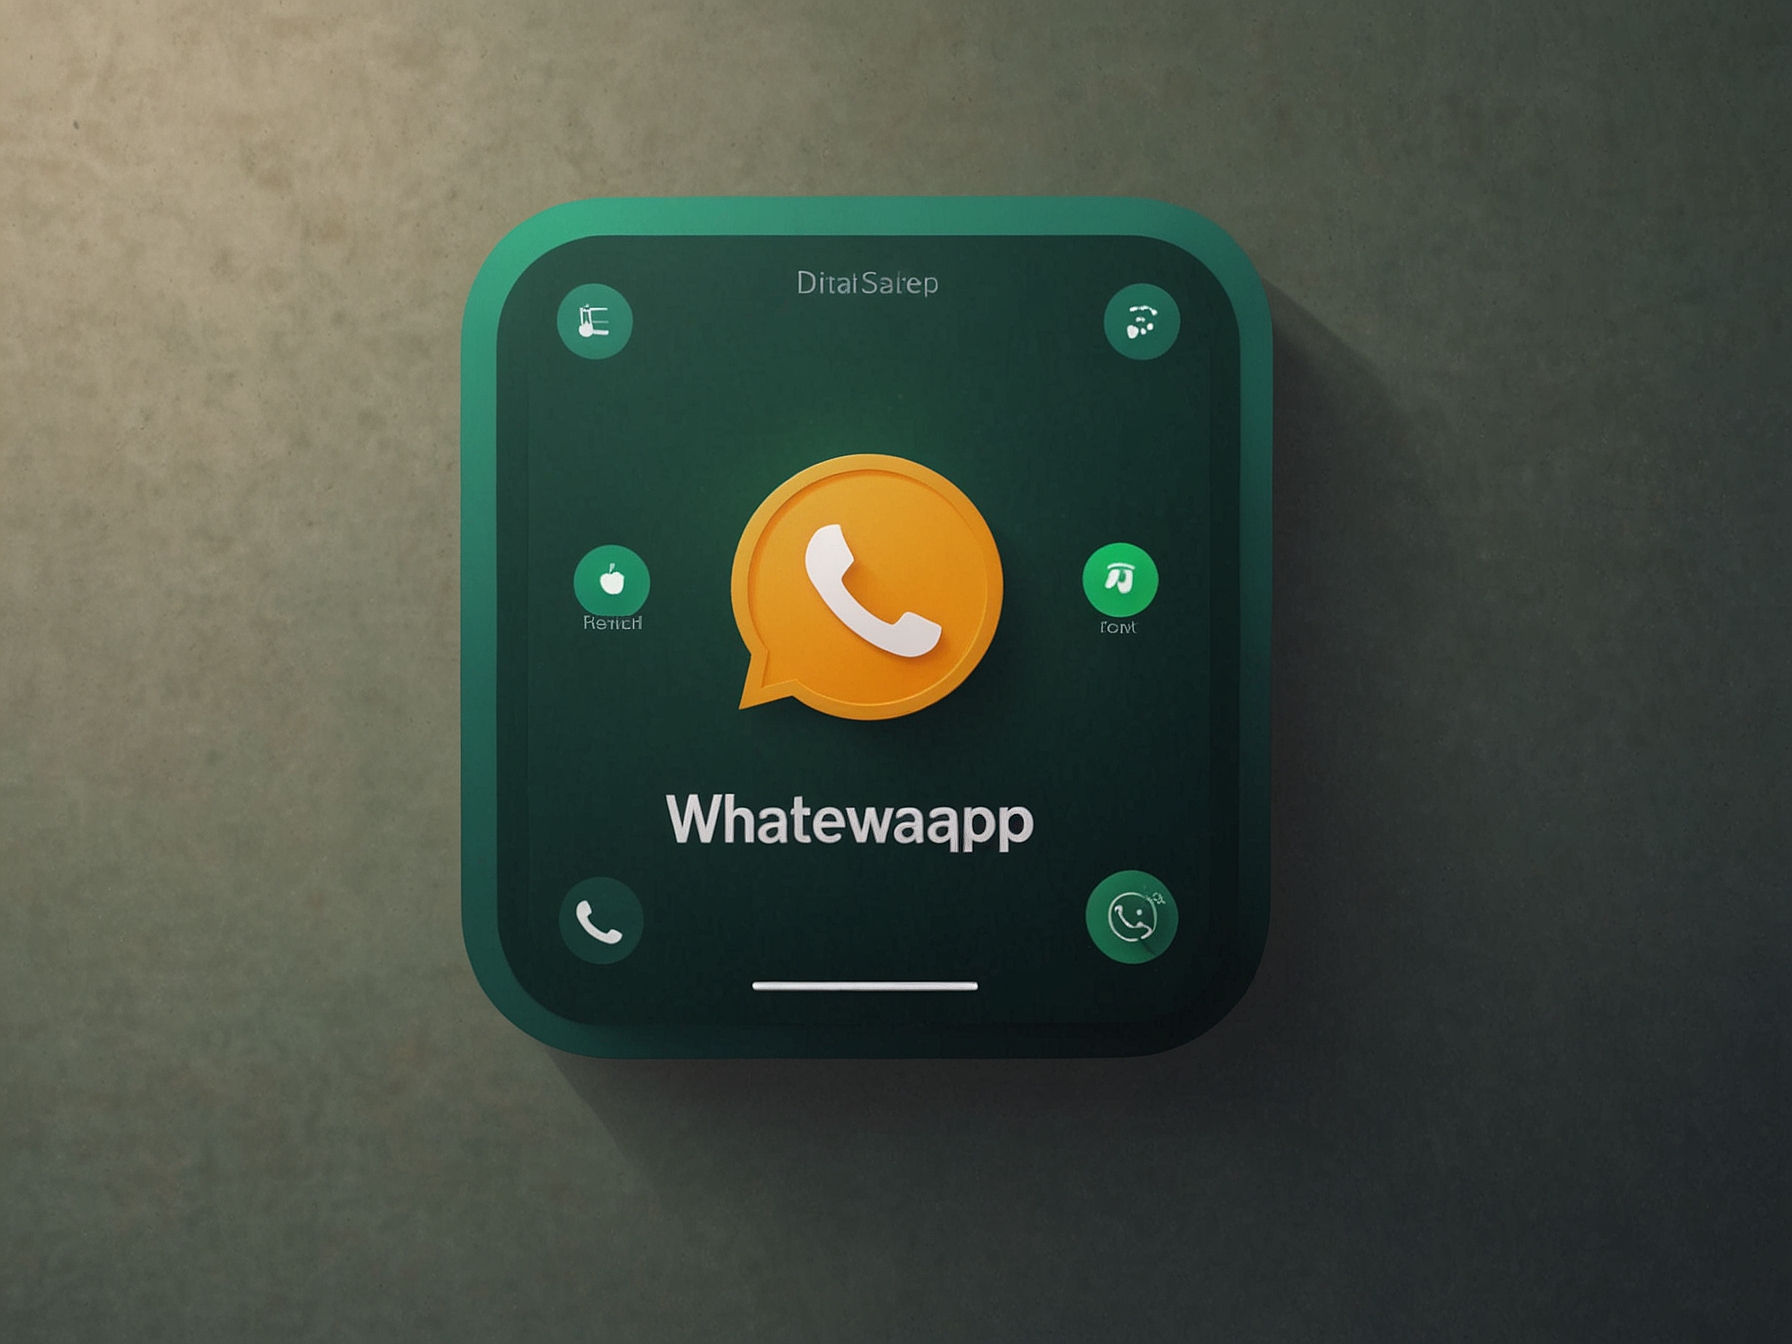 A graphic showing the floating action button within WhatsApp's calls tab, depicting how users can quickly access the new in-app dialer for seamless and intuitive calling.